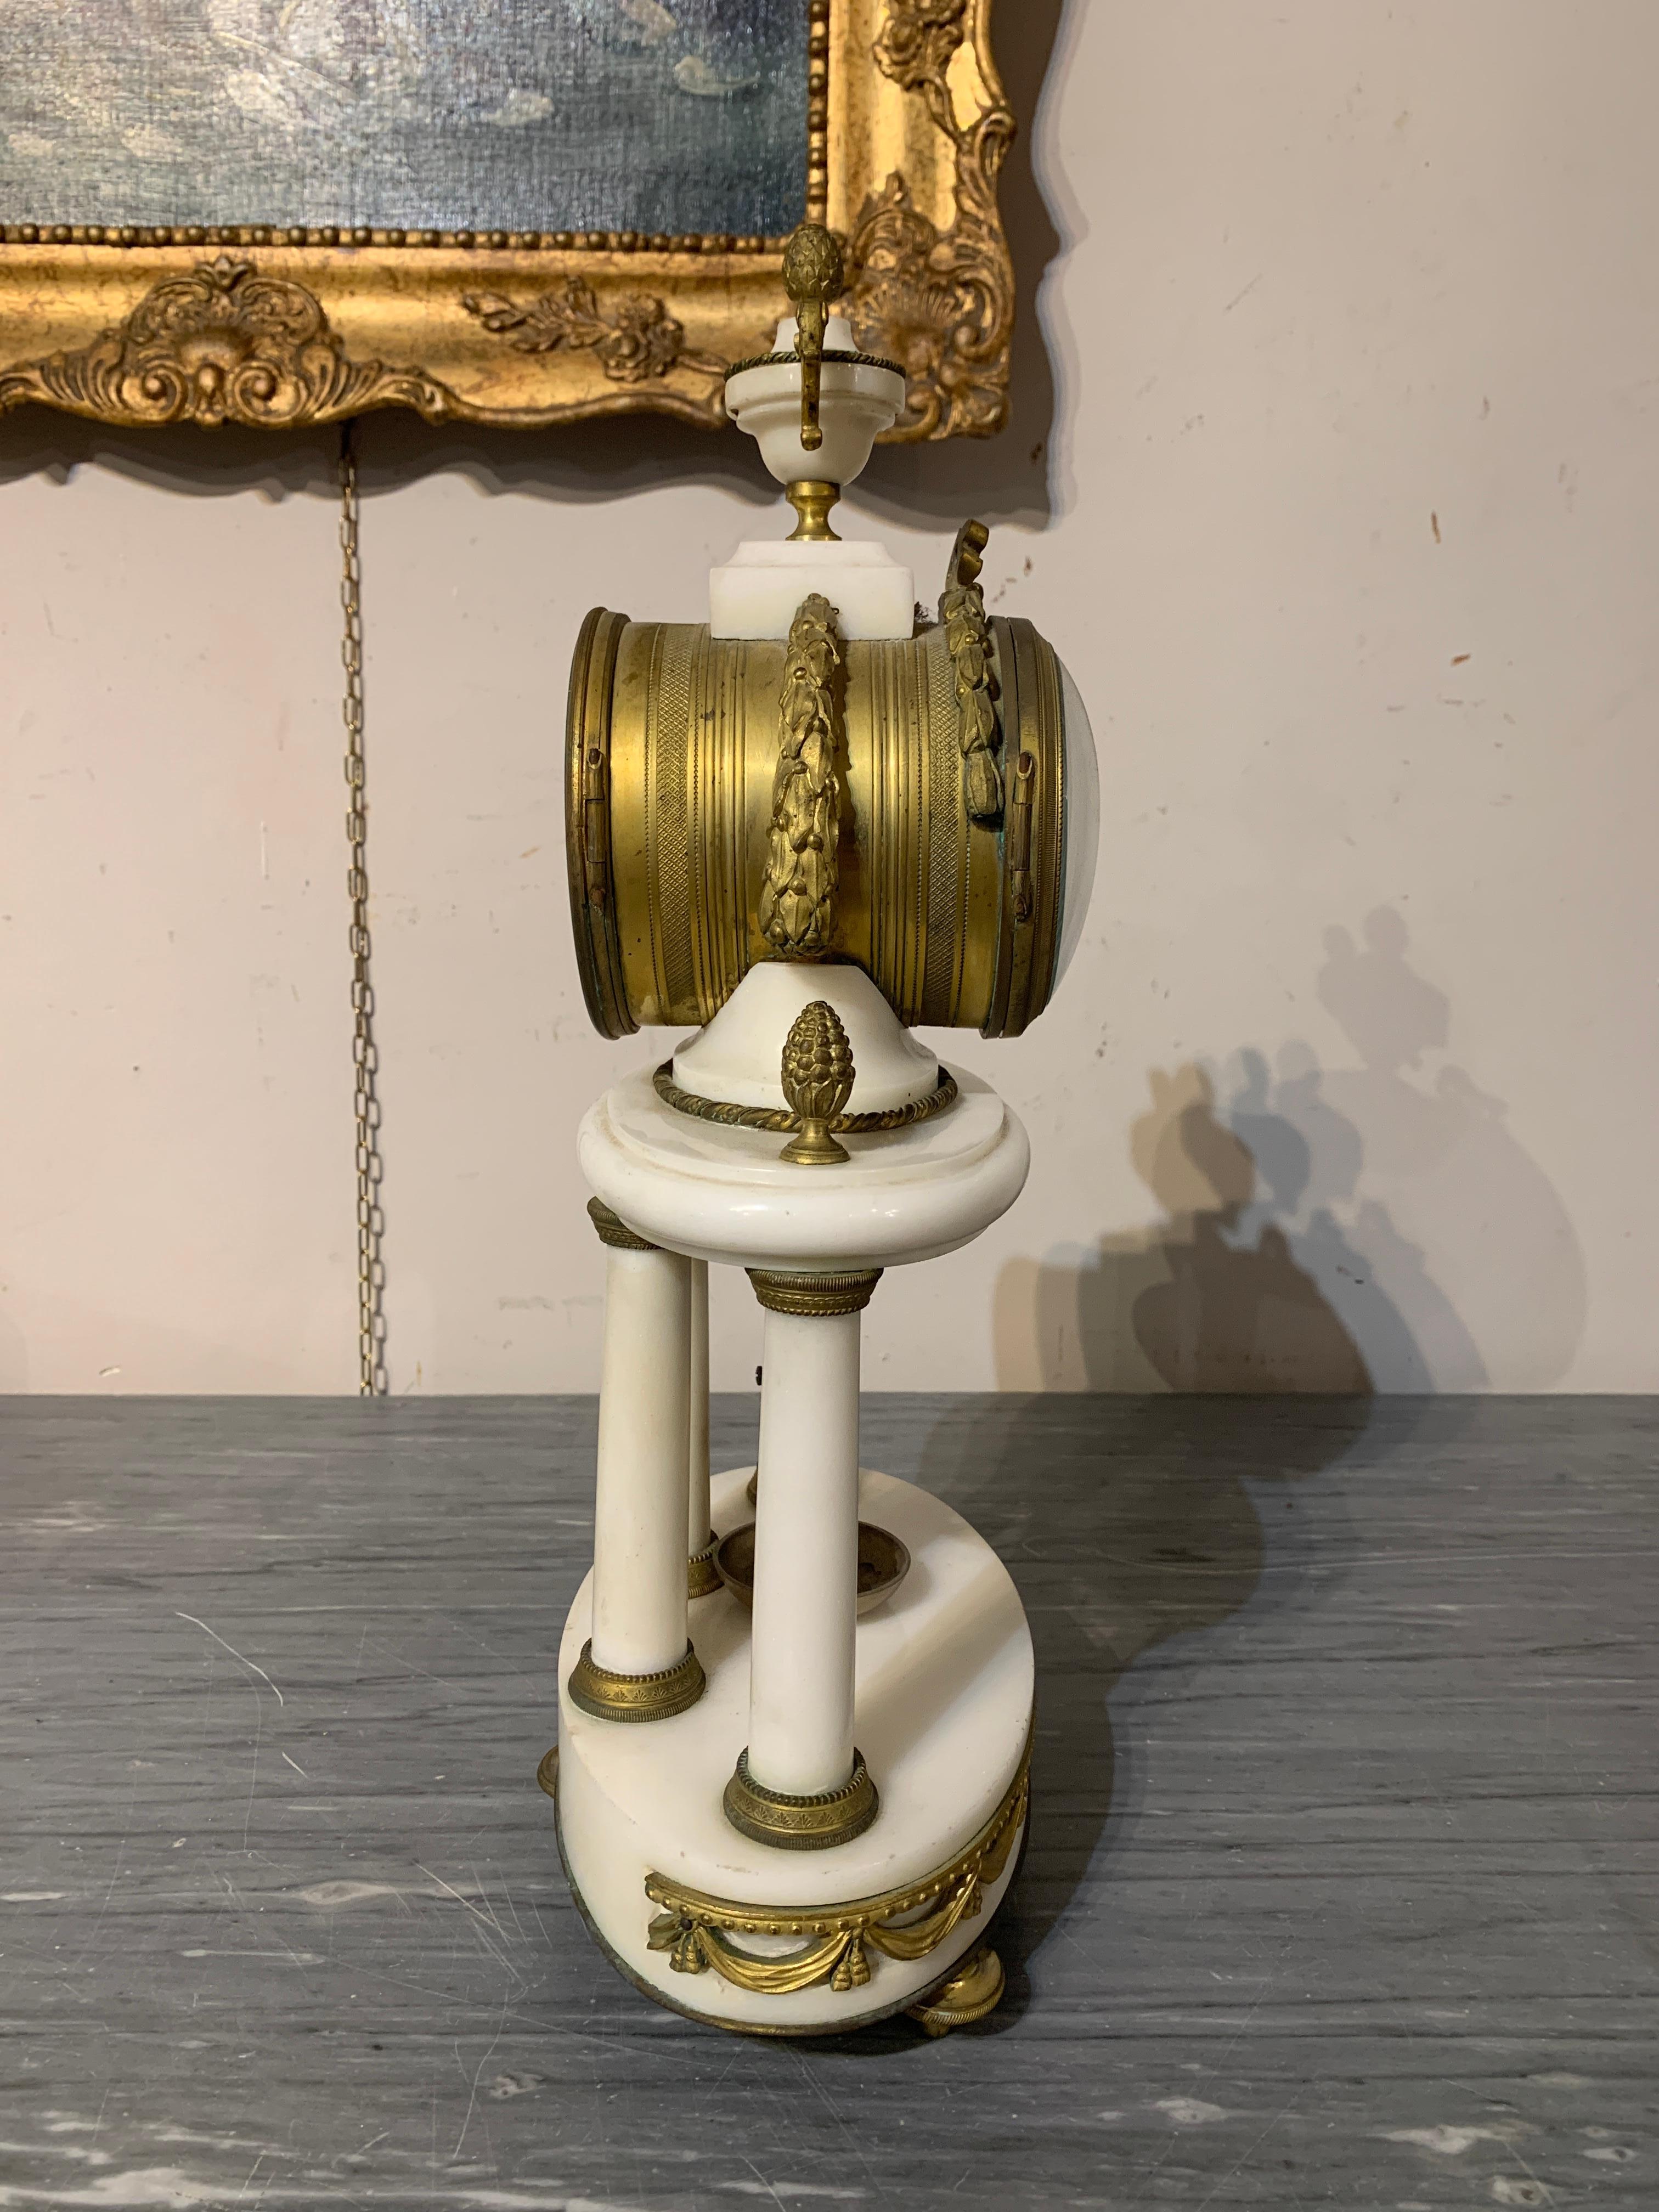 19th Century MID 19thCENTURY TRIPTYRY CLOCK AND CANDLESTICKS  For Sale